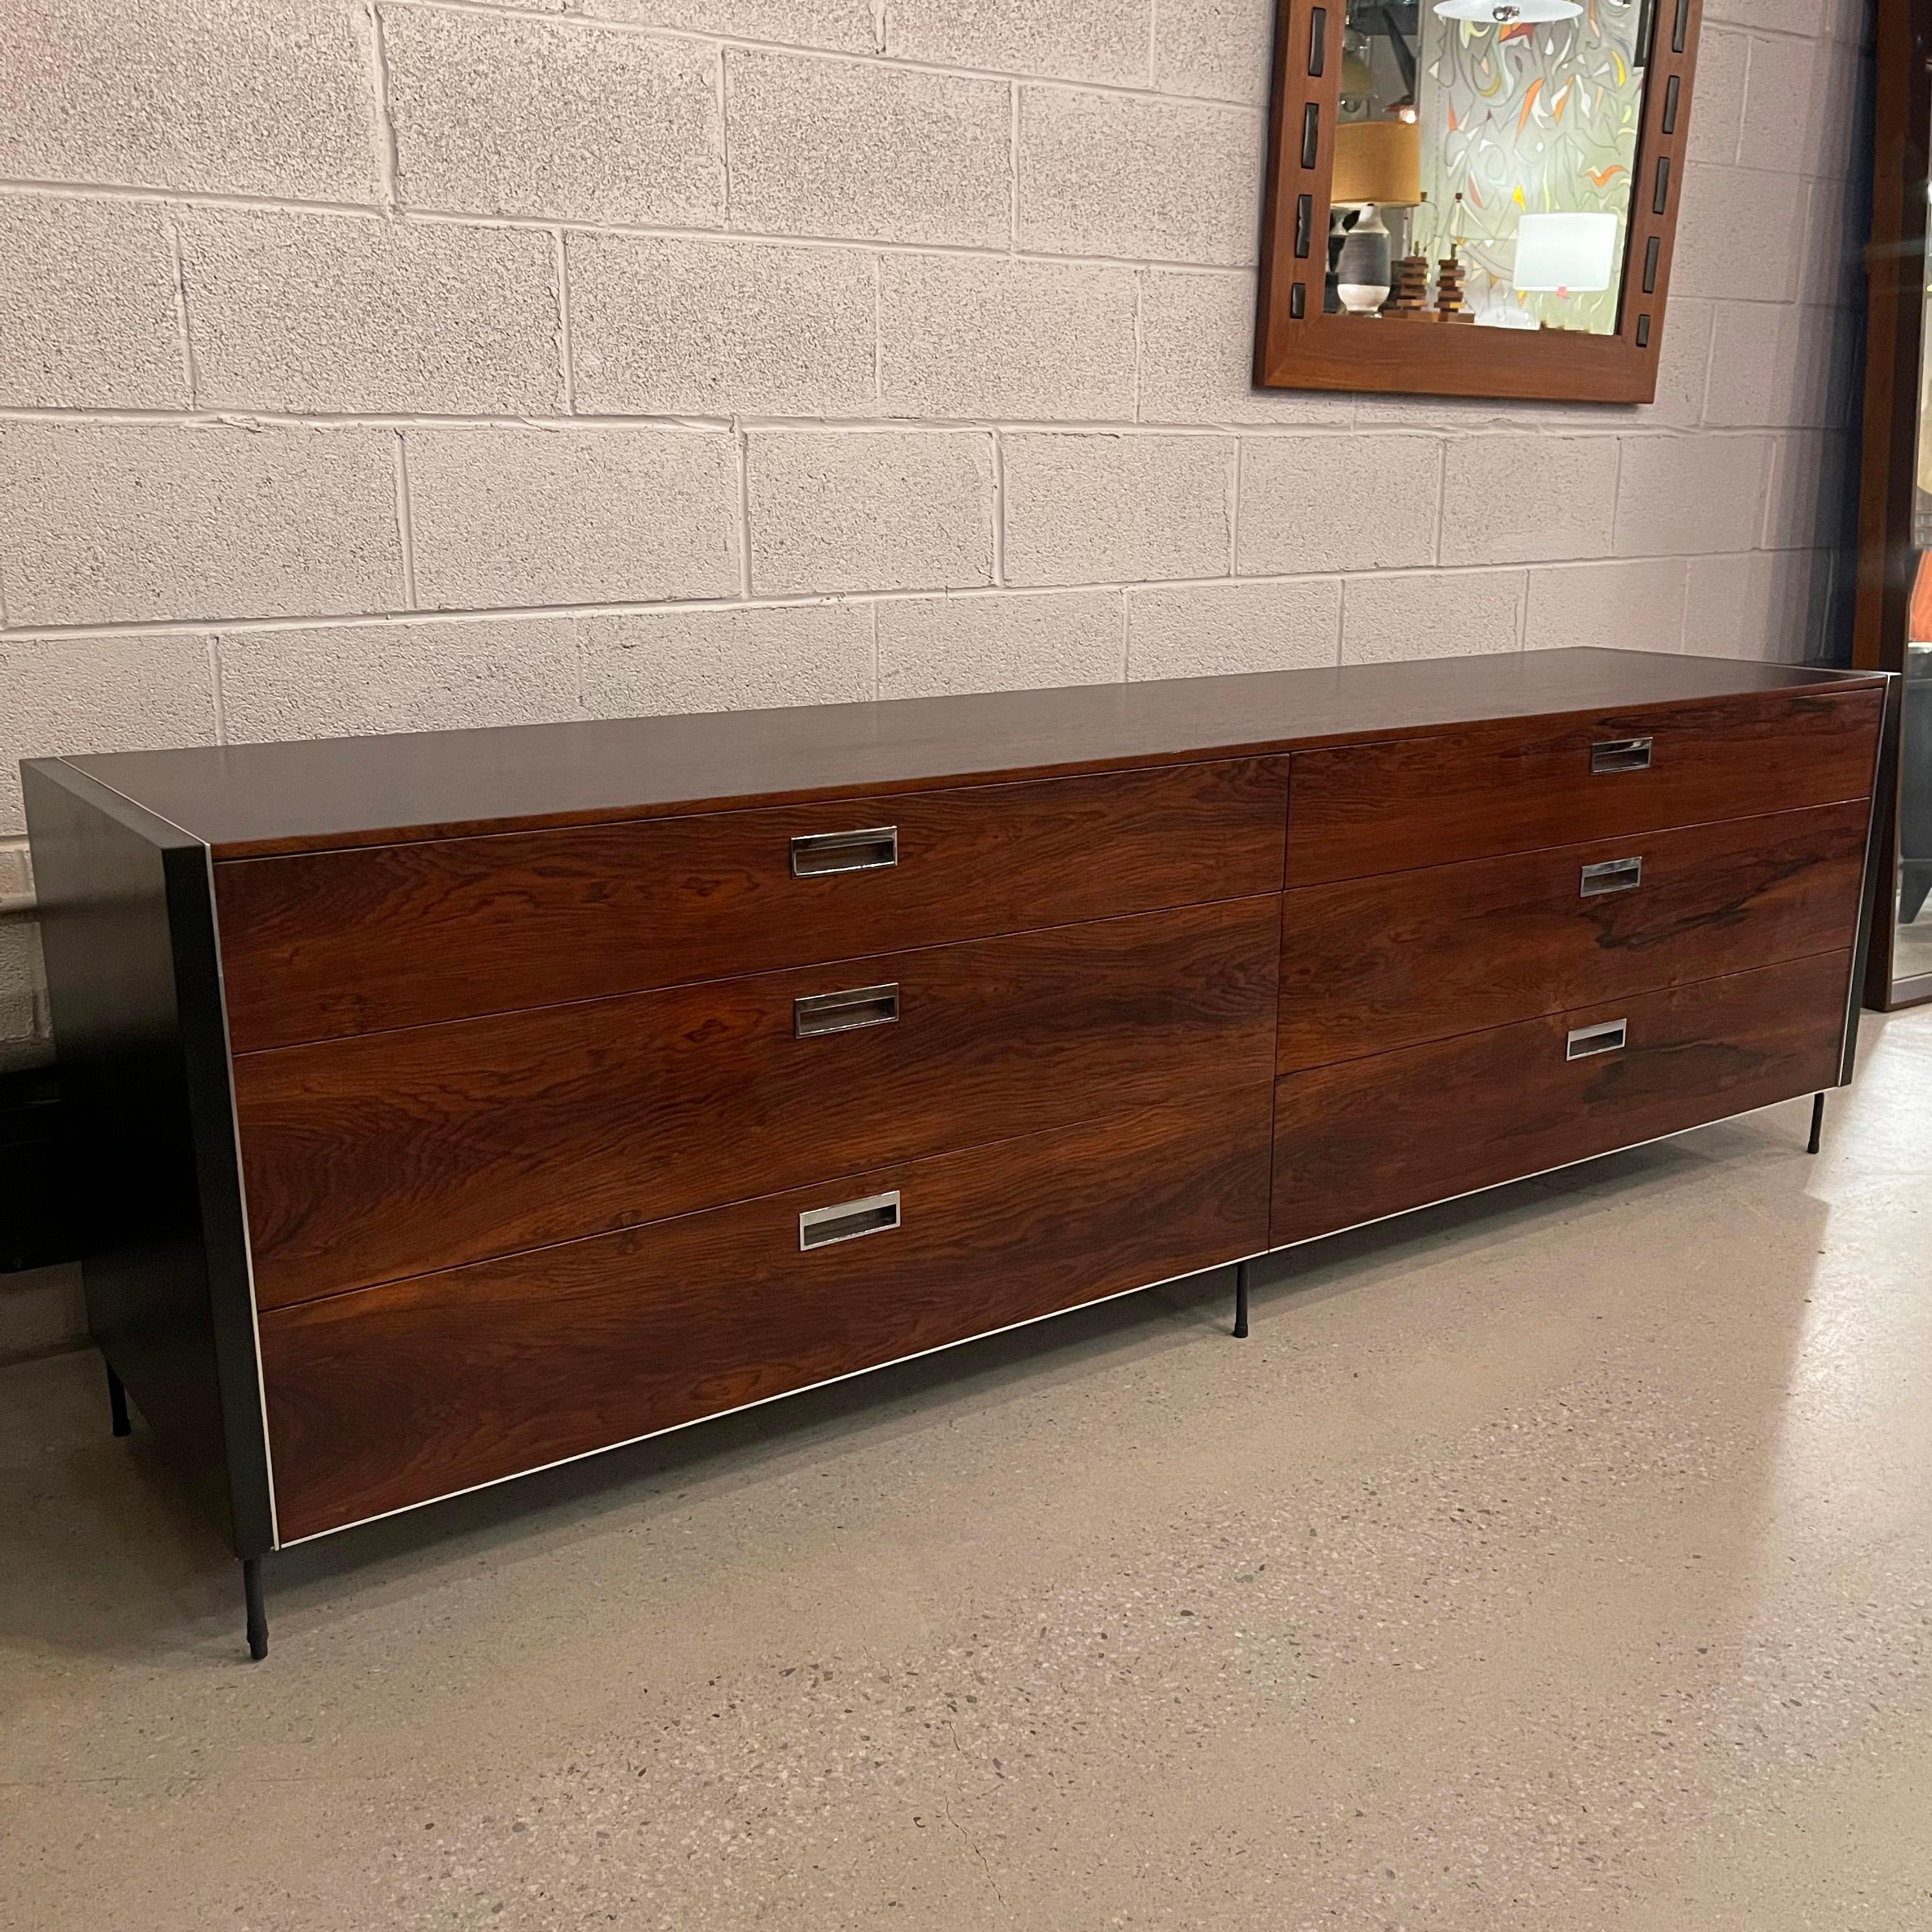 Sleek, modern, low and long, rosewood dresser features contrasting, black laquered sides with chrome trim and chrome recessed pulls on it's six drawers with wrought iron hairpin legs. The dresser has a wonderful, rich rosewood grain throughout.